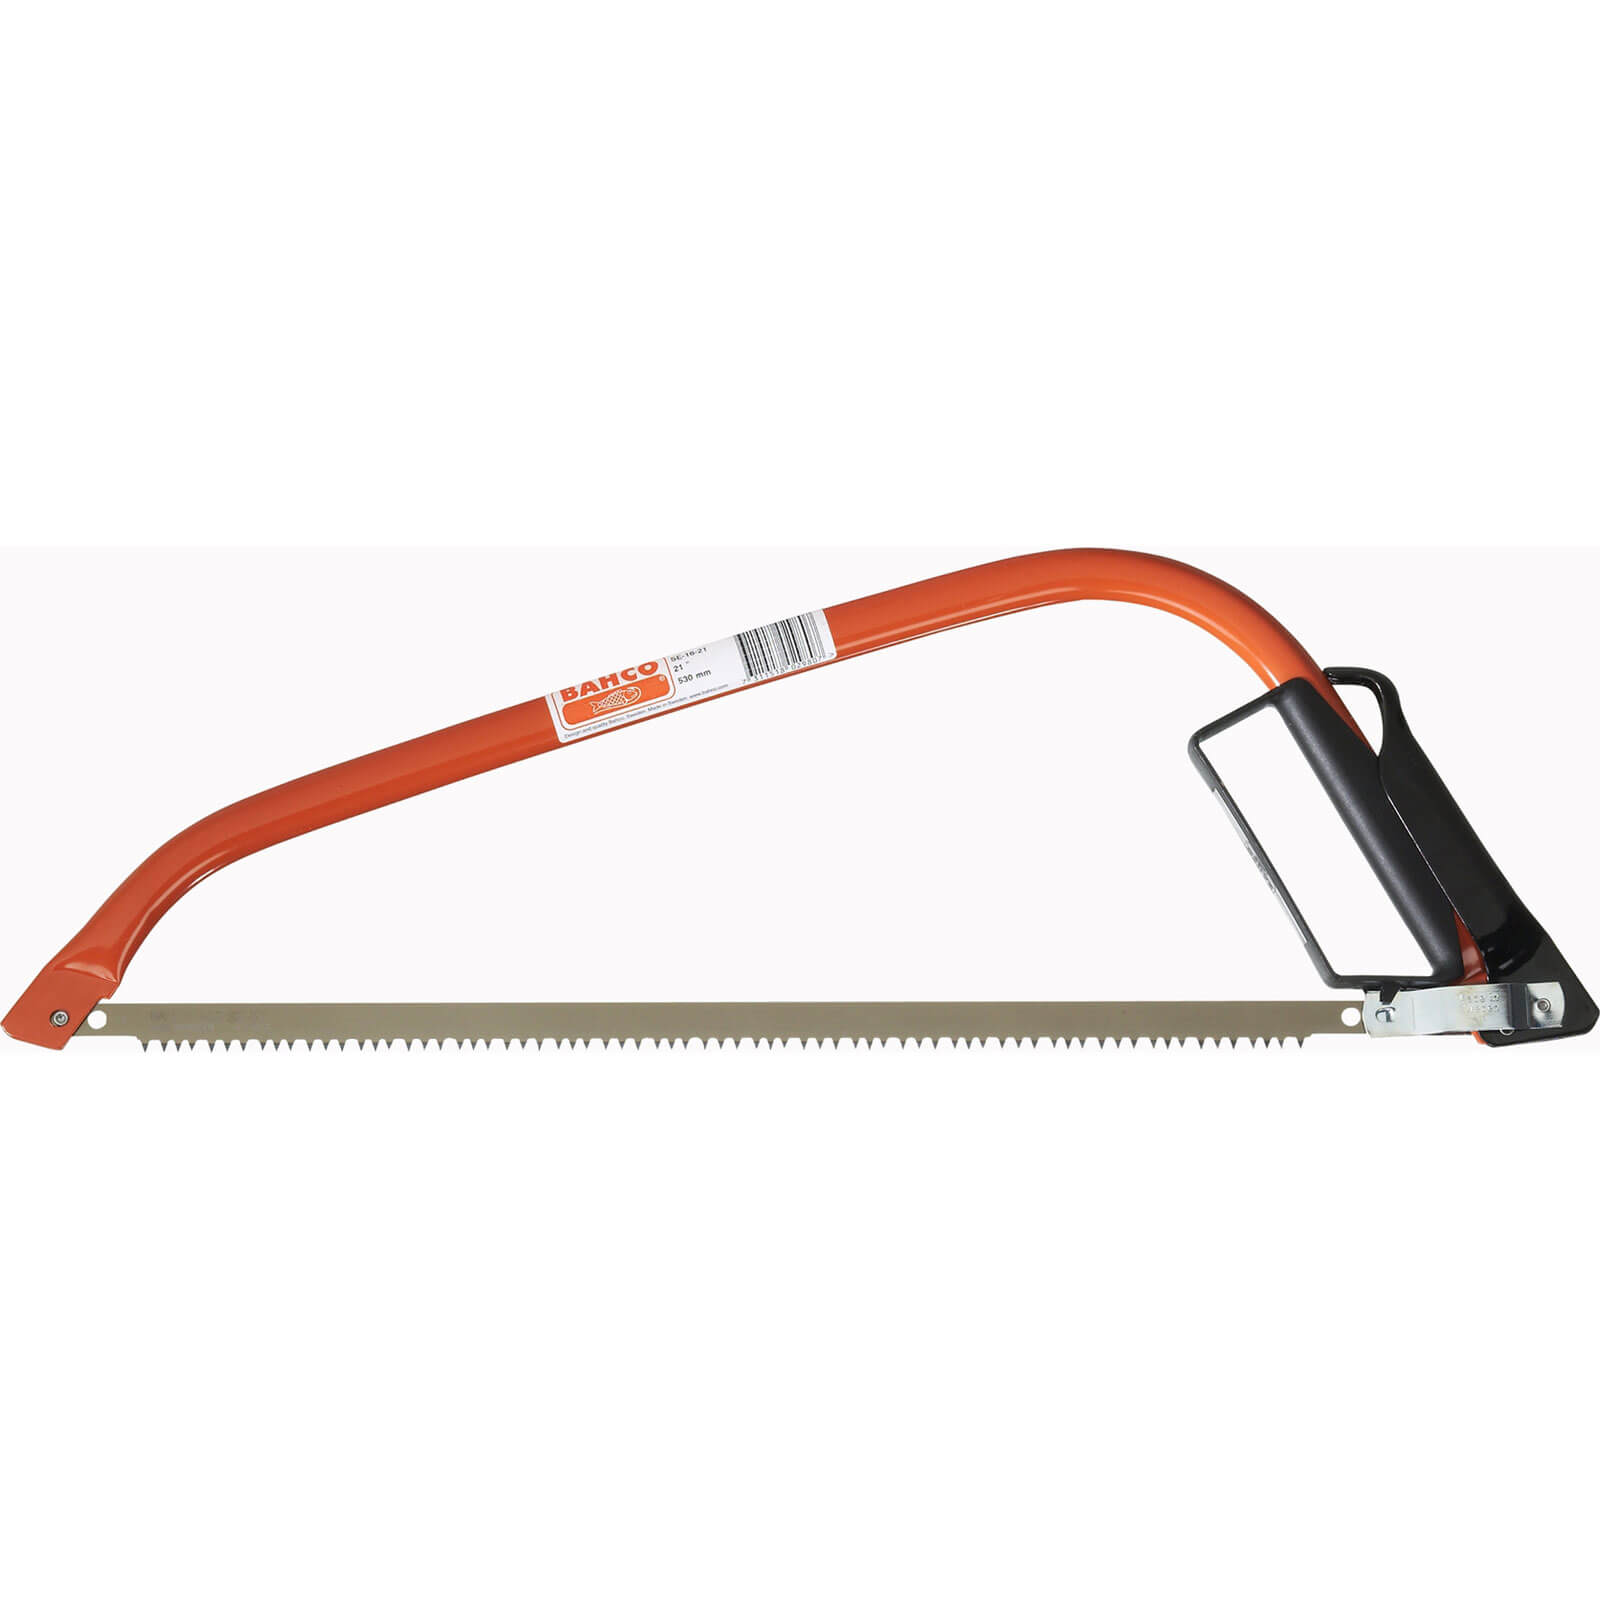 Bahco Economy Bowsaw 21" / 530mm 51 Tooth All Purpose